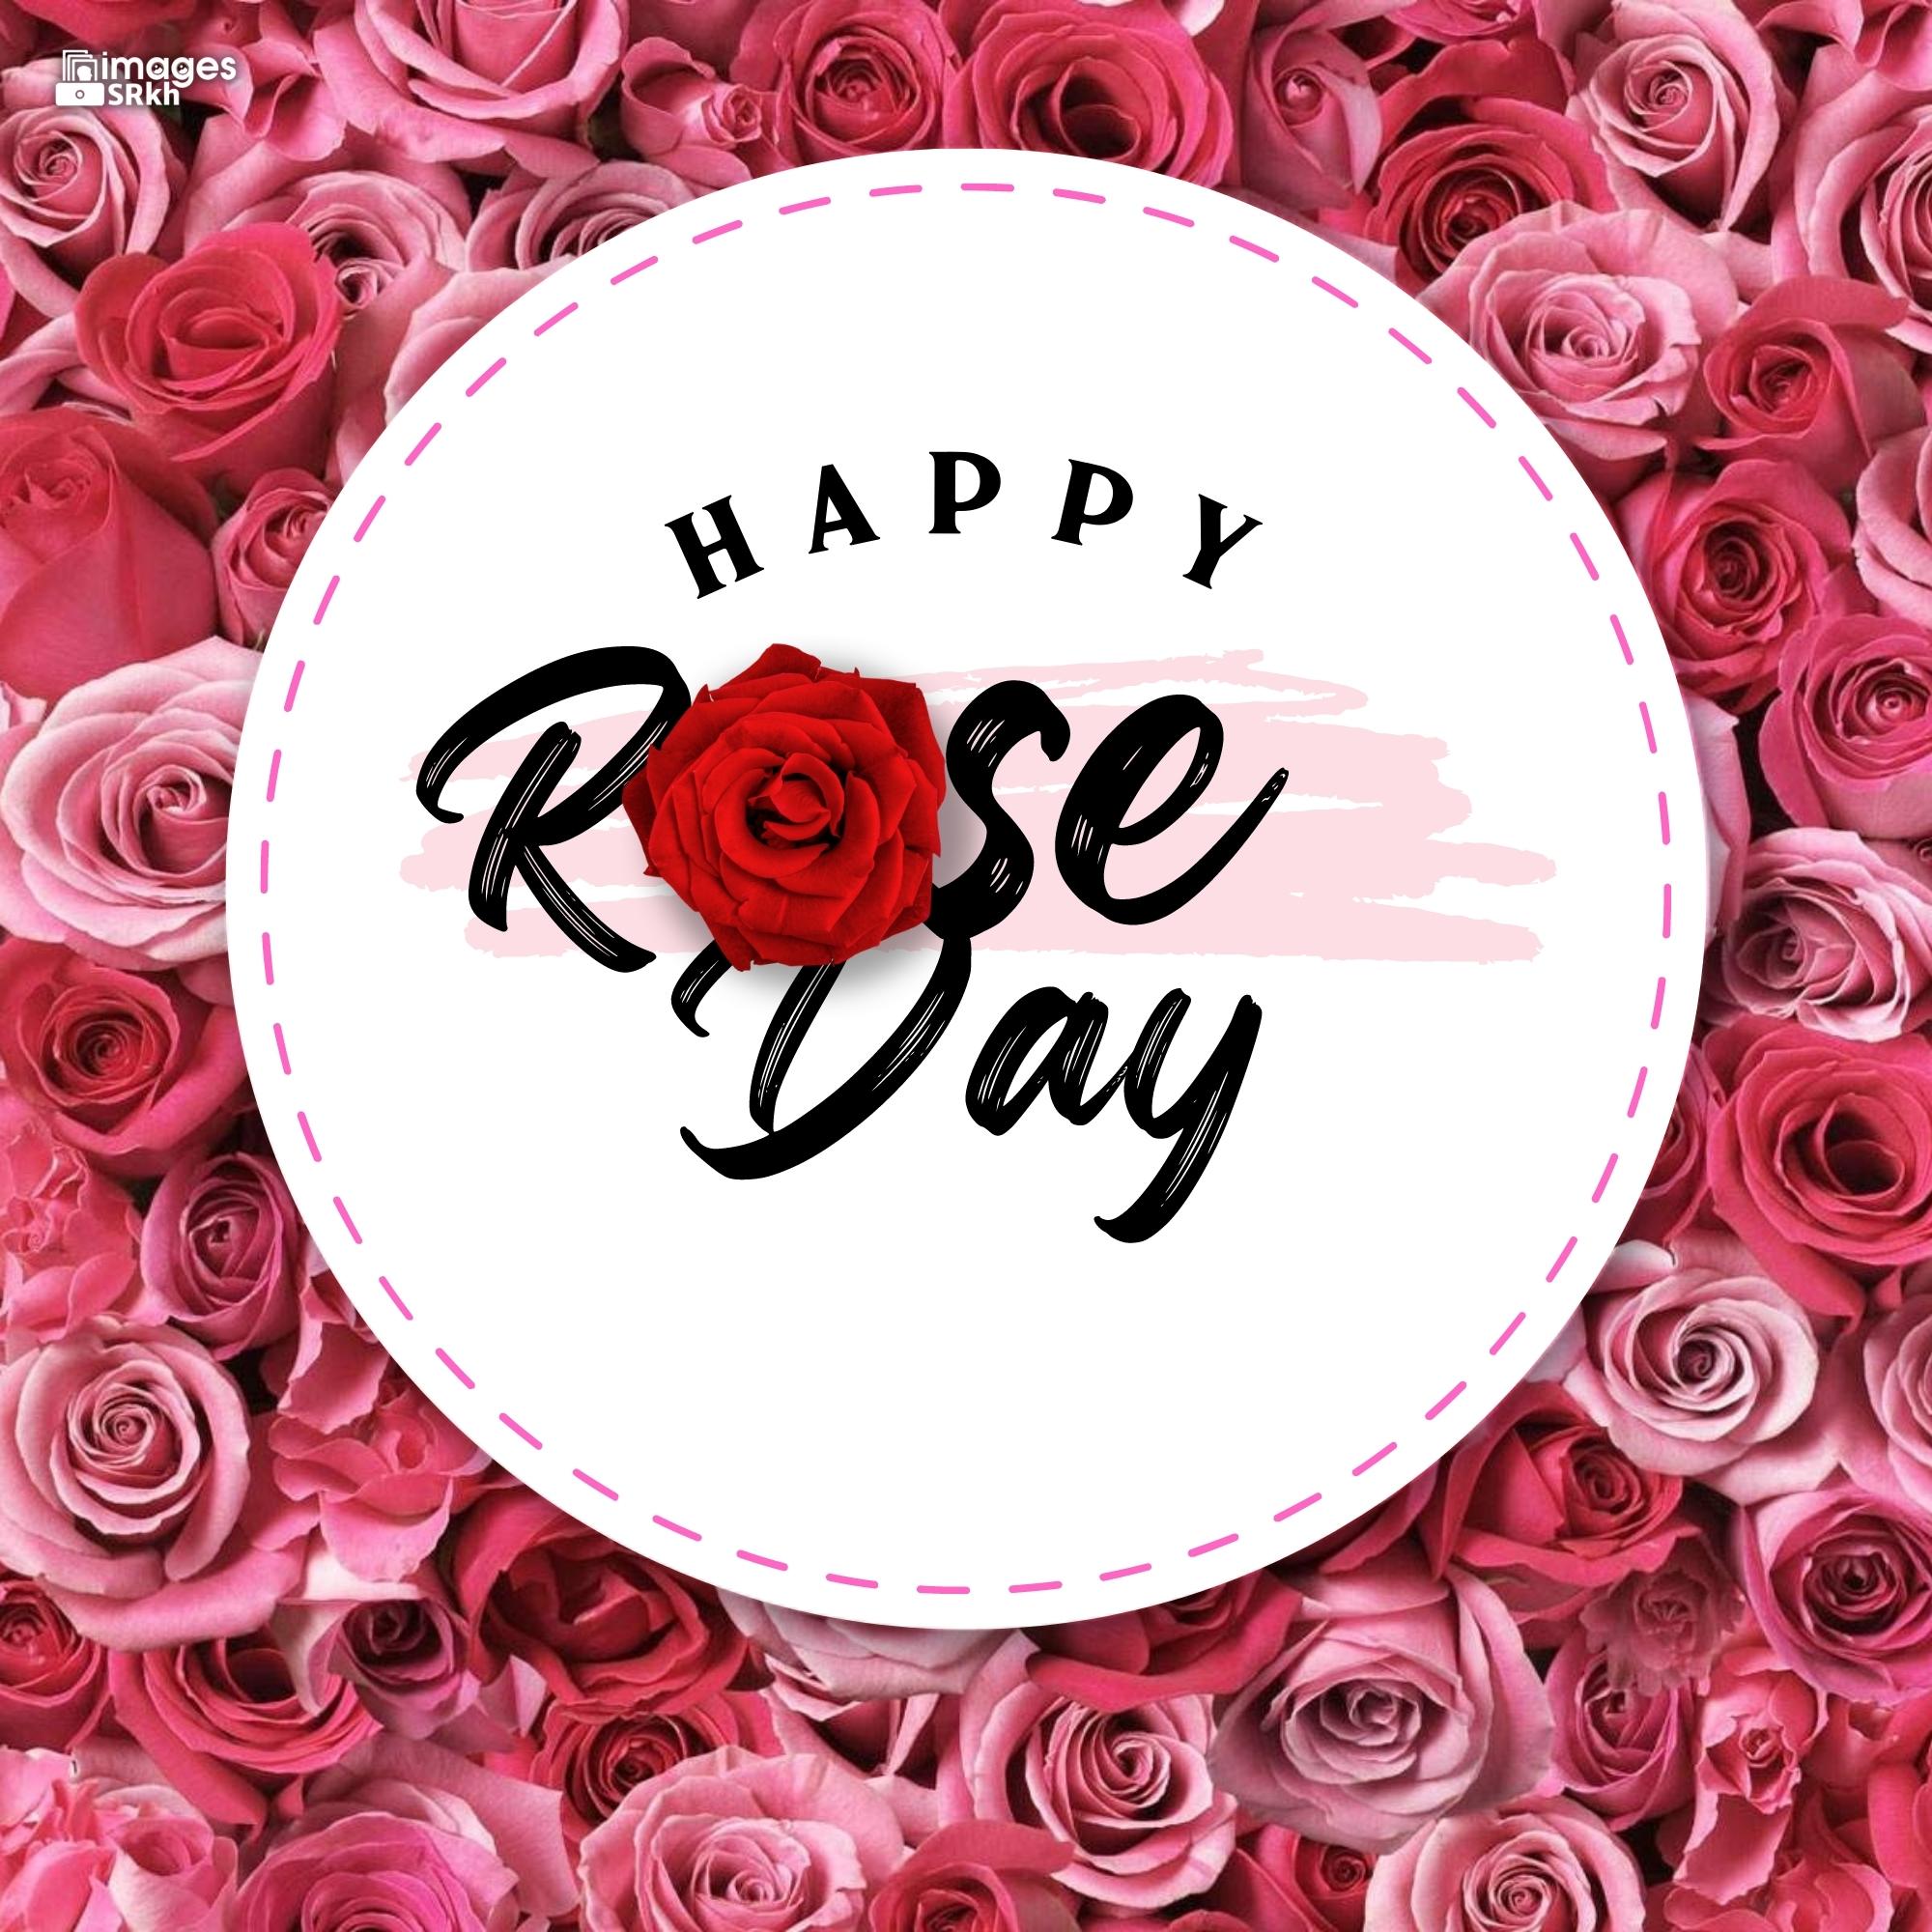 Happy Rose Day Image Hd Download (53)